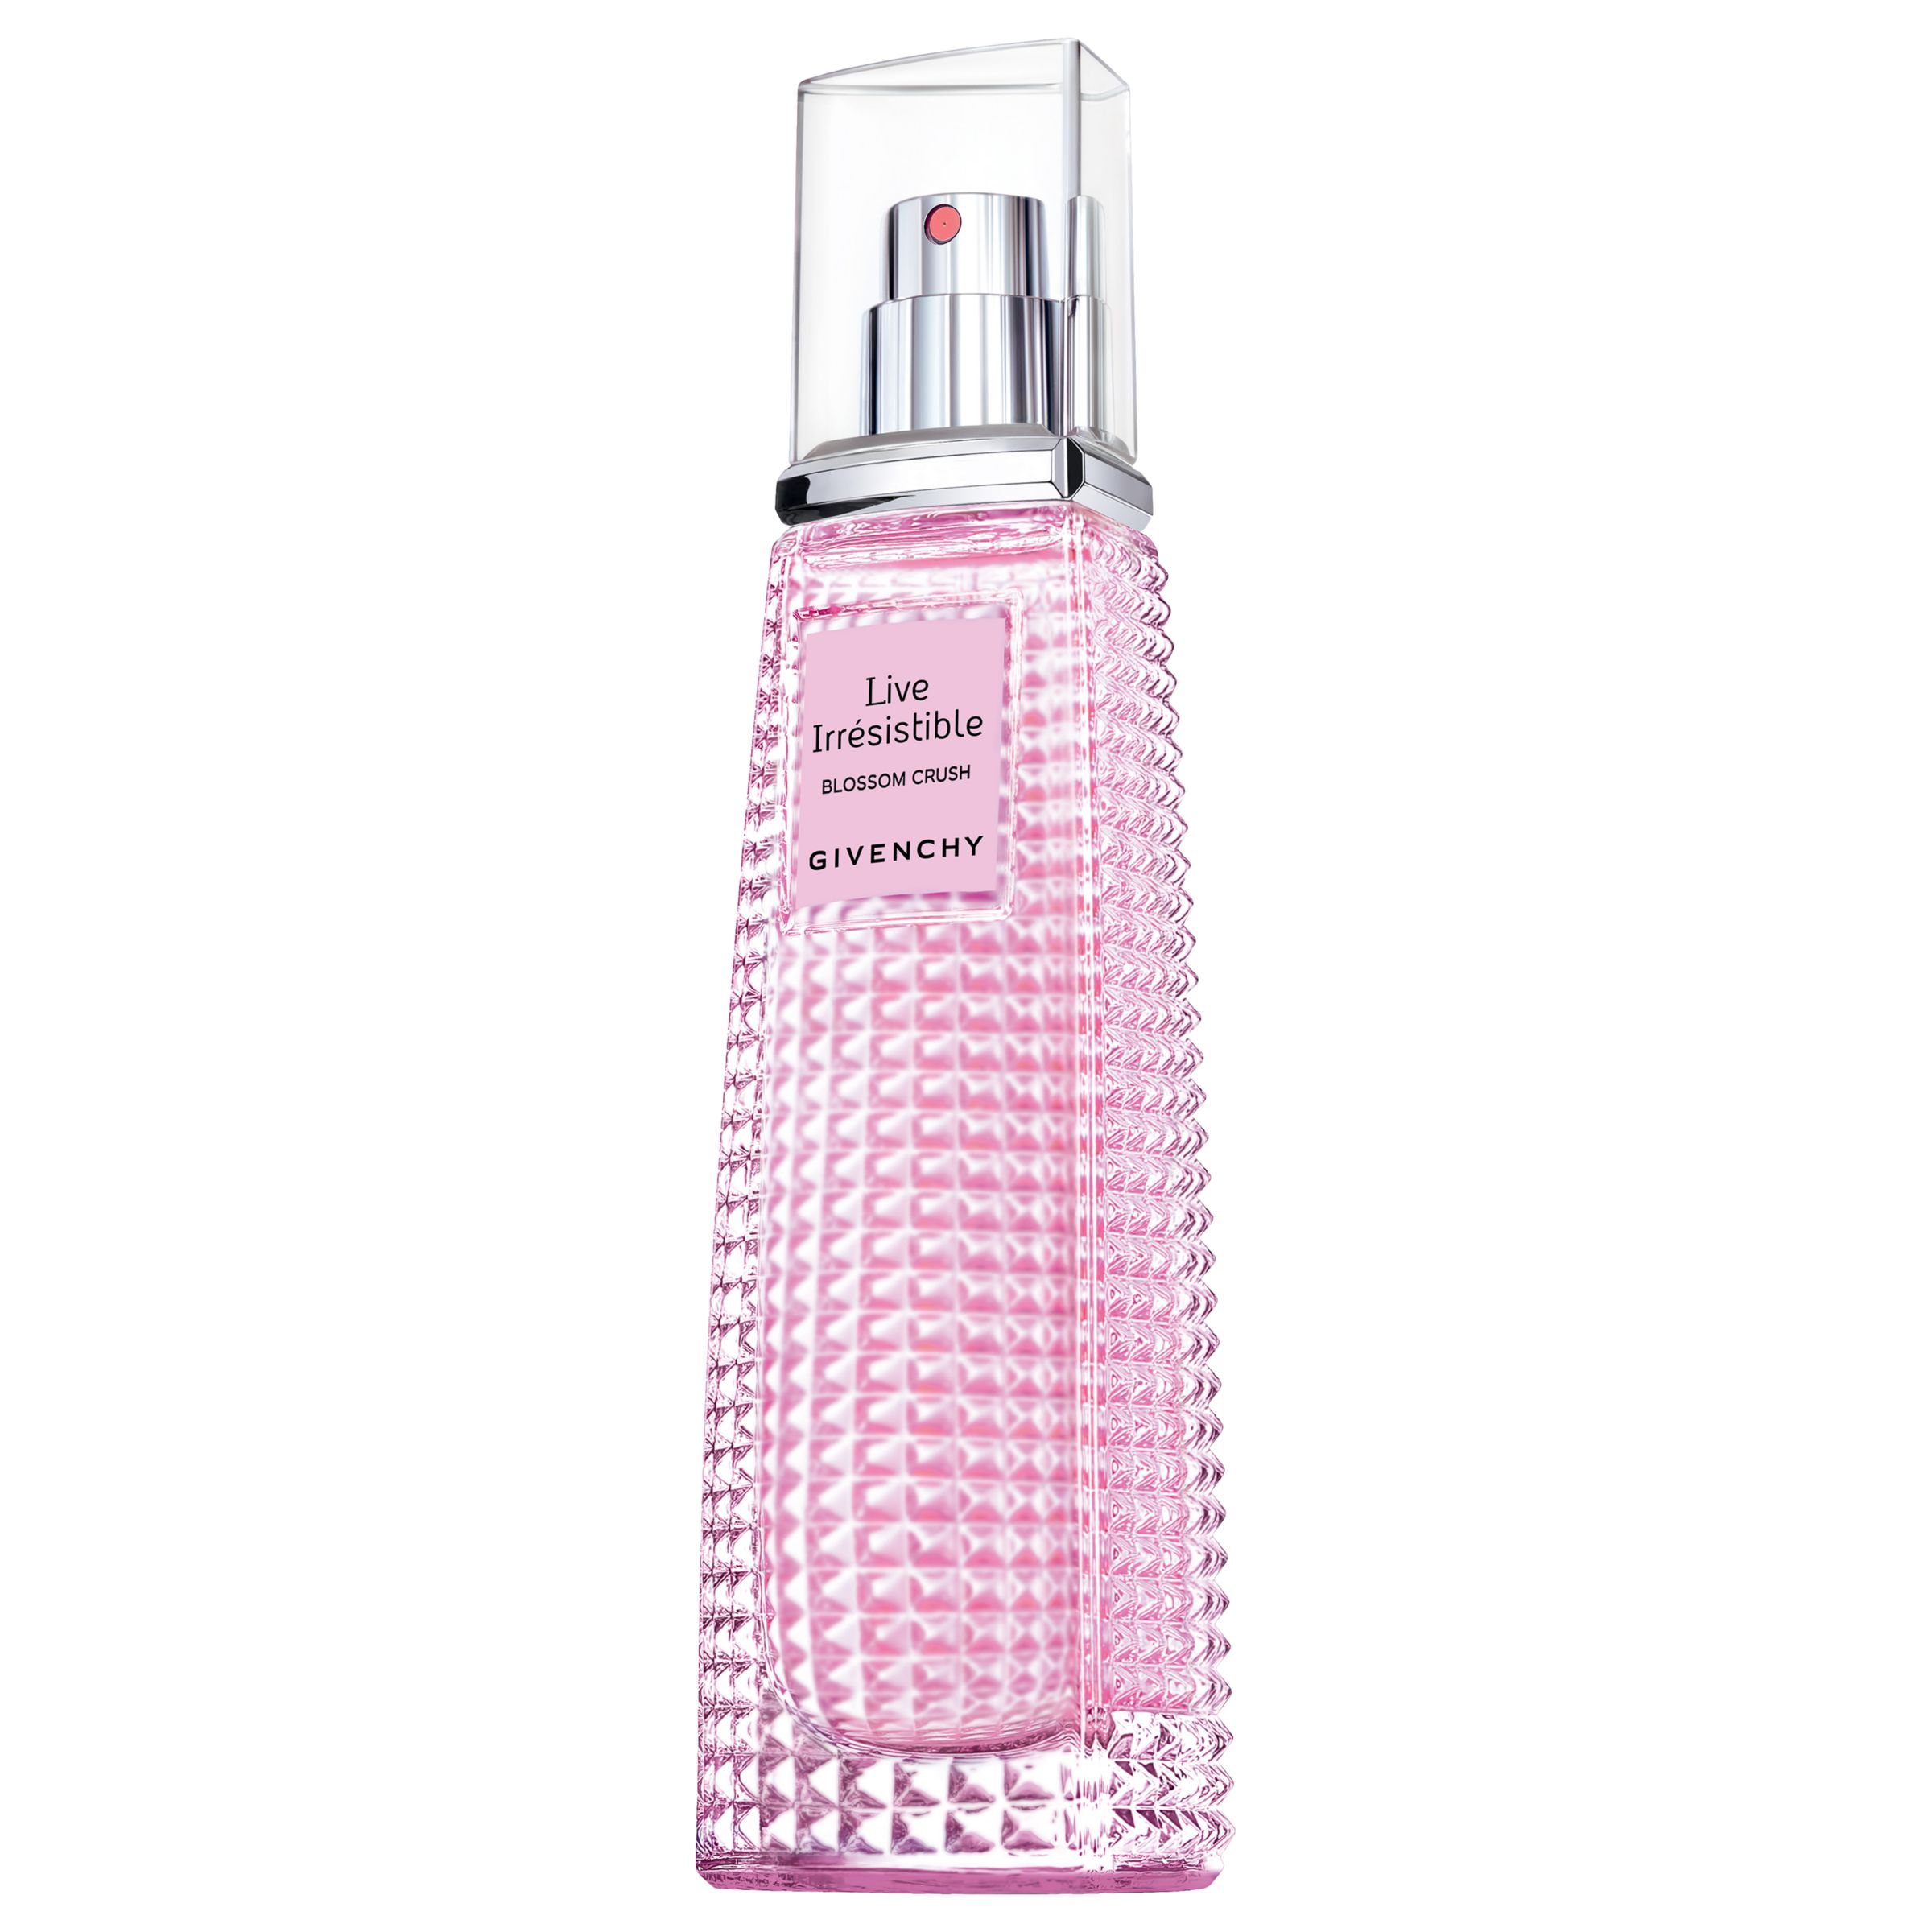 givenchy live irresistible blossom crush price